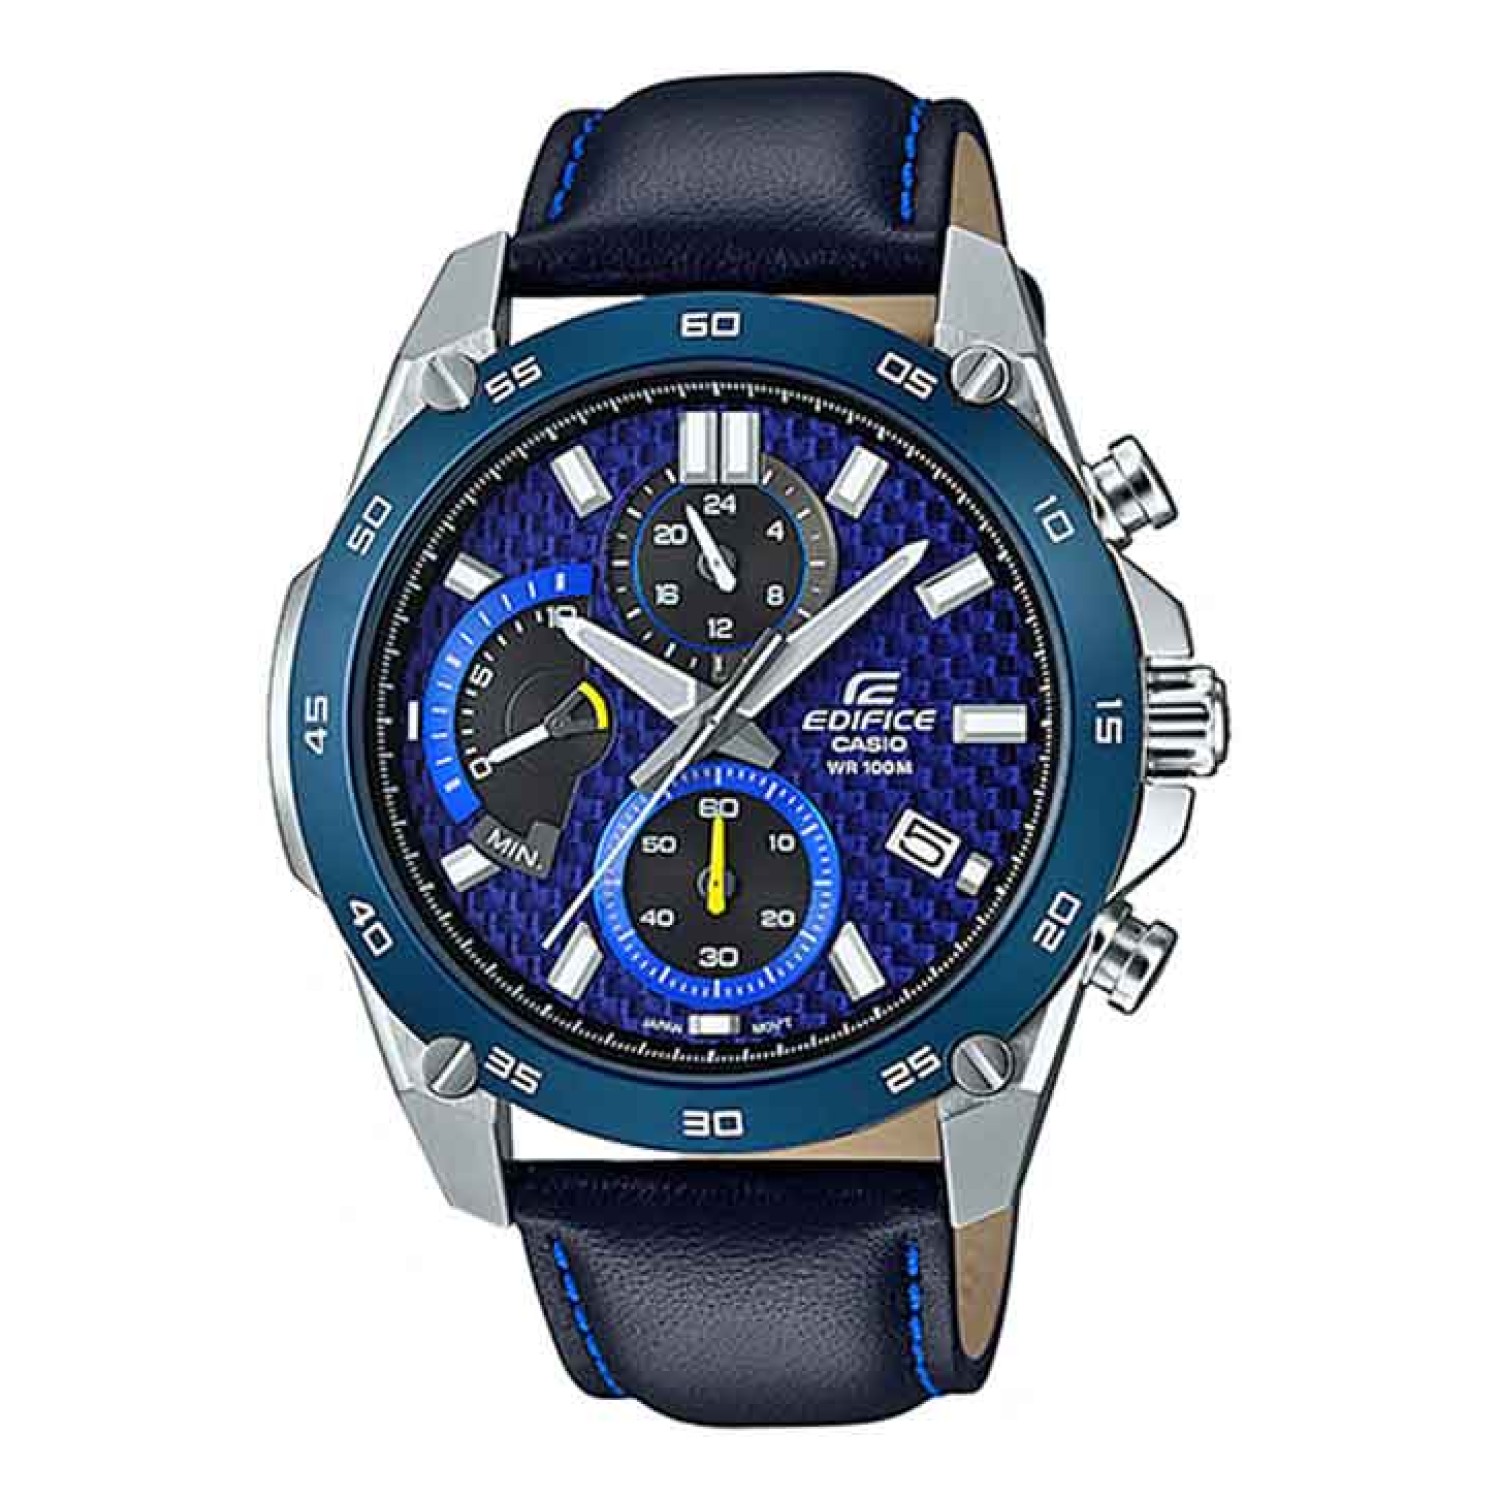 EFR557BL-2A  Casio Edifice Racing Series. Oxipay is simply the easier way to pay - use Oxipay and well spread your payment up to a maximum of $1500 over 4 easy instalments. No interest. Ever! 2 Year Casio Guarantee which is only available at authorised Ne